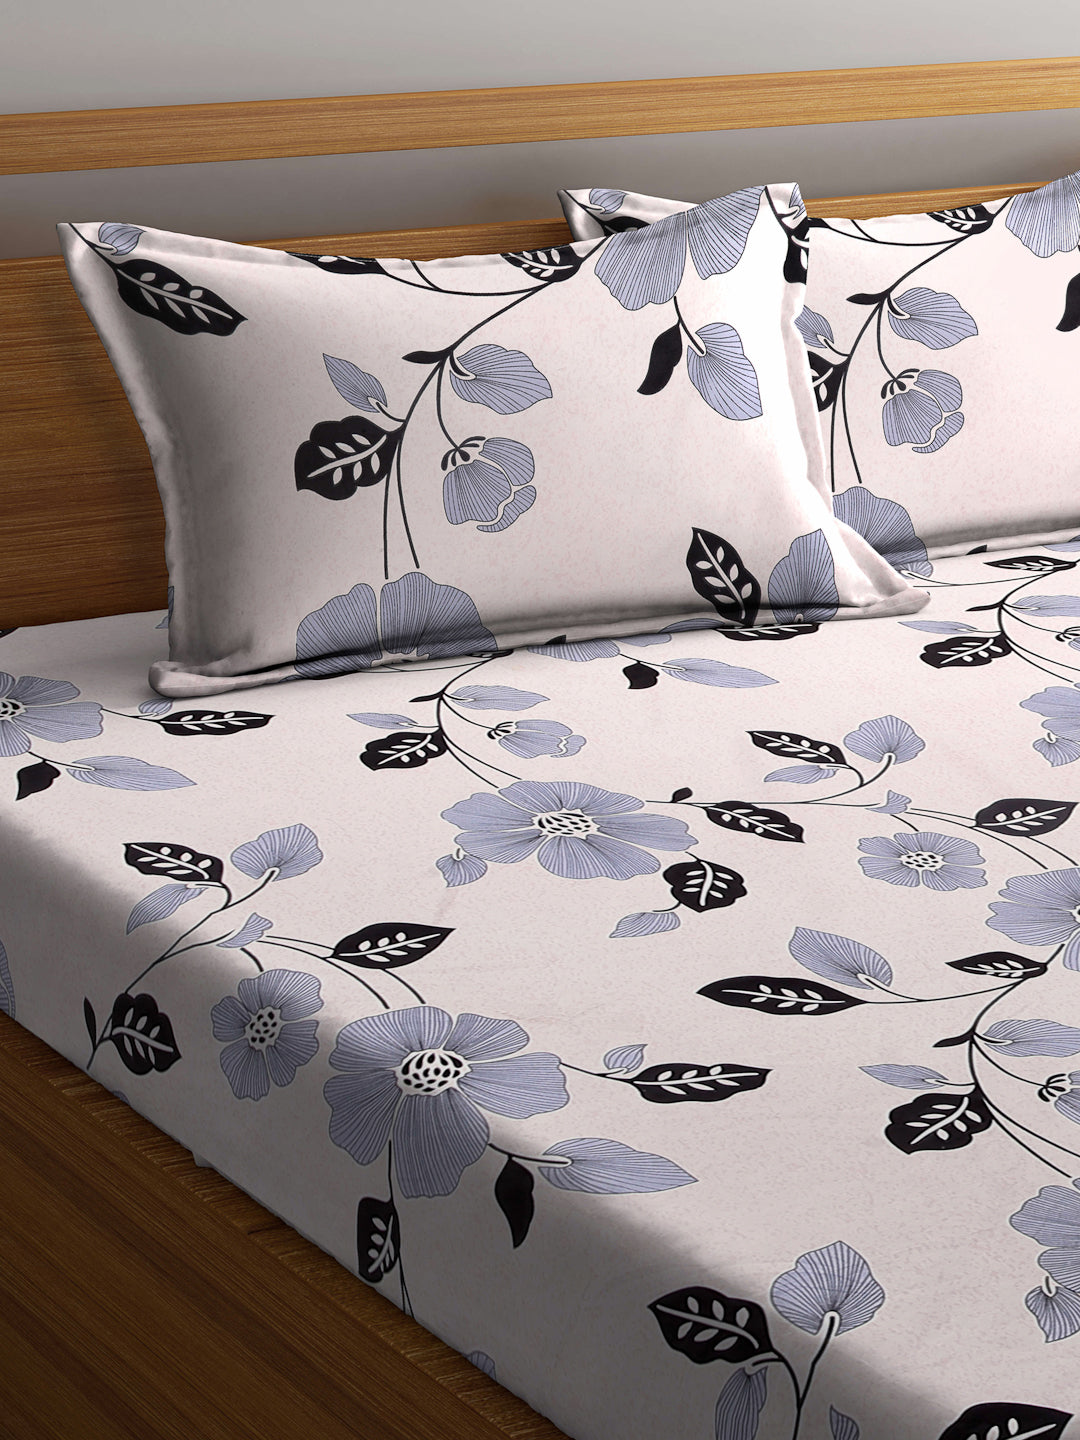 Arrabi Beige Floral TC Cotton Blend King Size Bookfold Bedsheet with 2 Pillow Covers (250 X 220 cm)